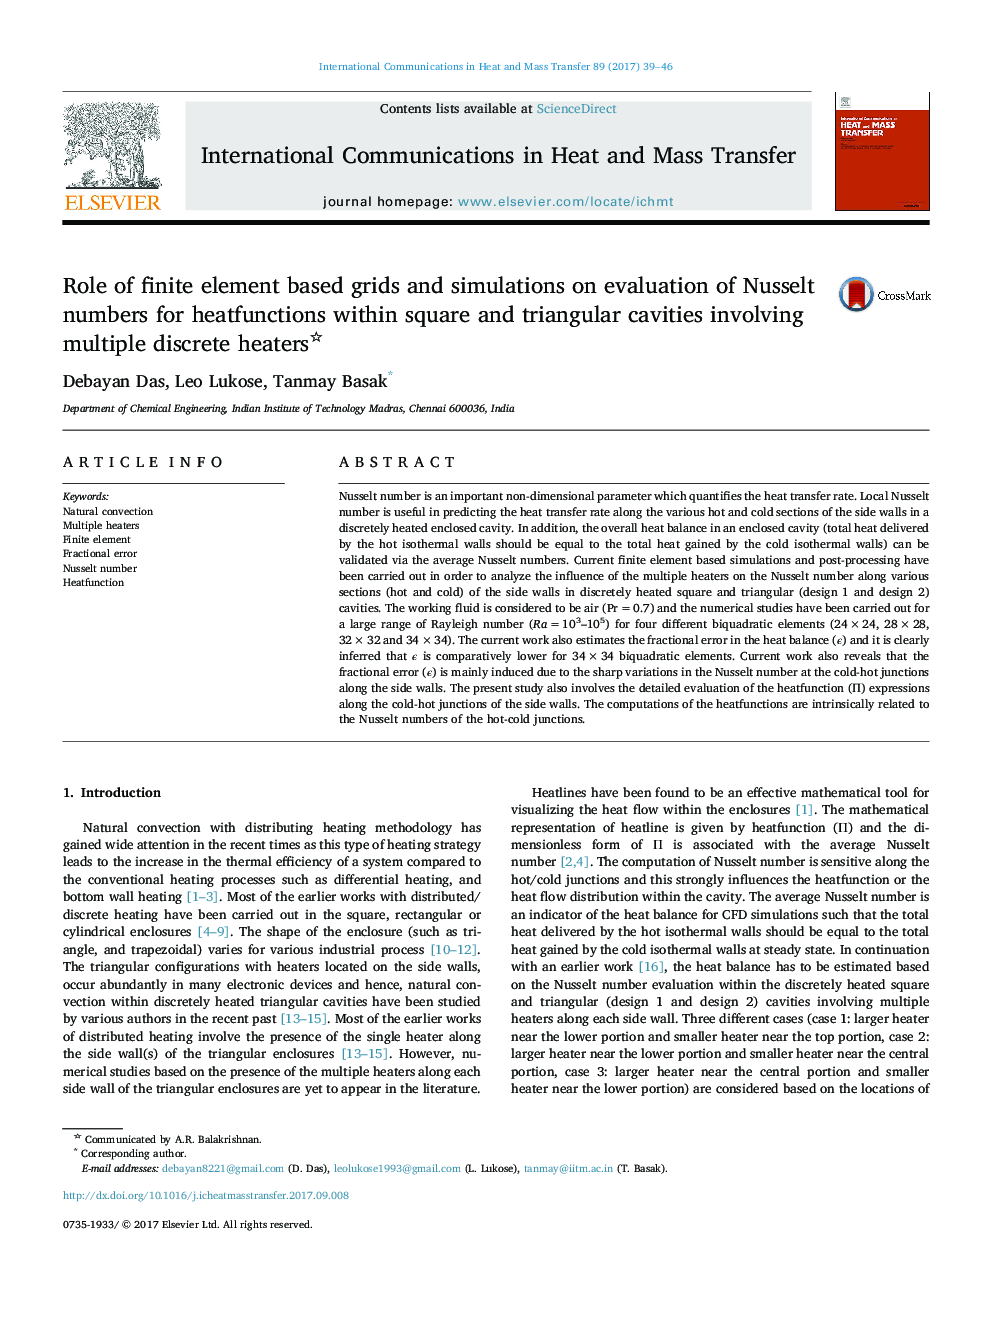 Role of finite element based grids and simulations on evaluation of Nusselt numbers for heatfunctions within square and triangular cavities involving multiple discrete heaters